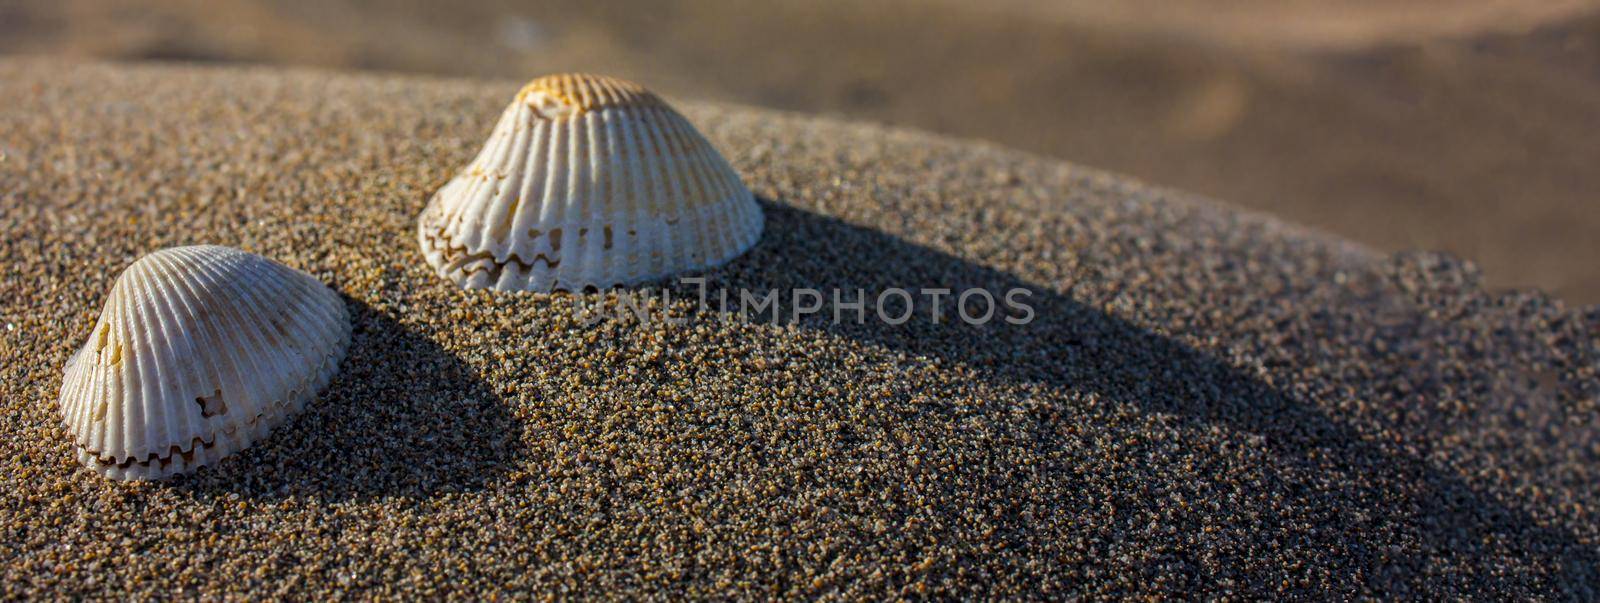 Seashells on the sand by pippocarlot